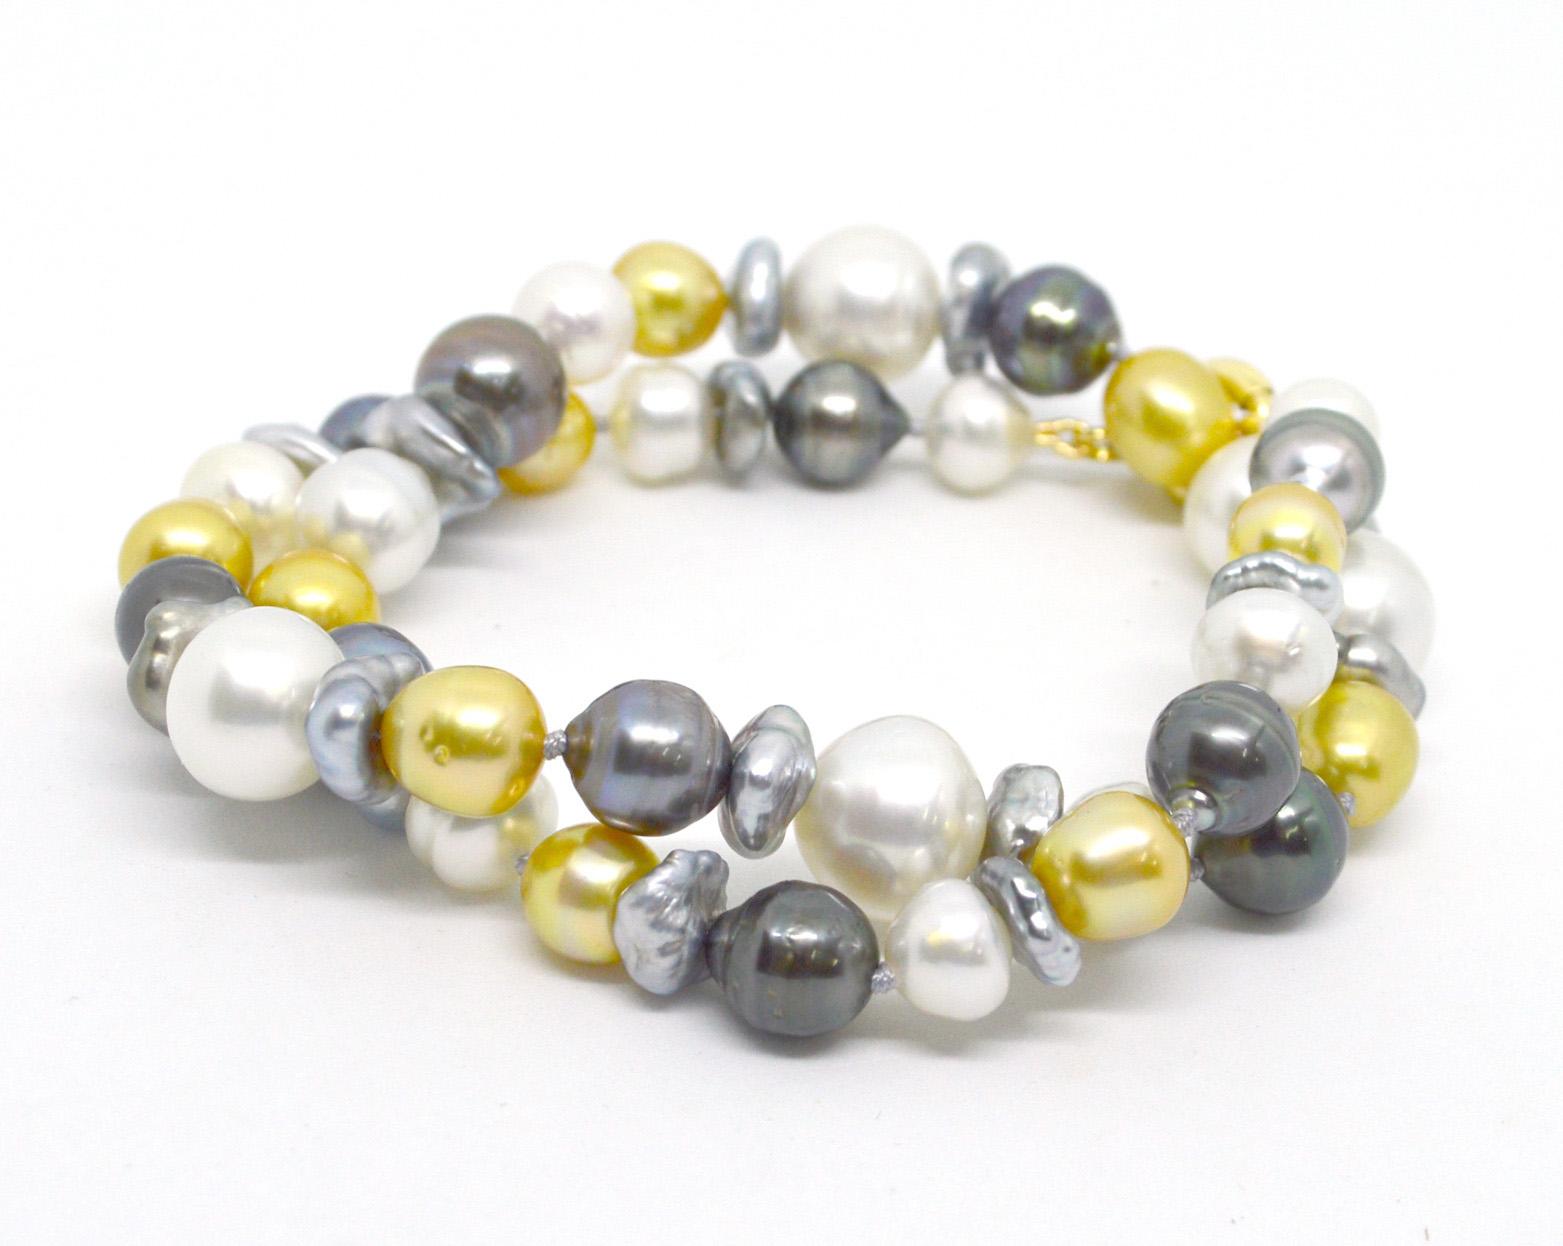 Adorn your neck in luxury with soft tones of creams, whites, gold, and greys. A mix of baroque Australian South Sea and Tahitian Pearls ranging from 10mm to 14mm.
Necklace 51cm in length. Hand knotted on soft grey thread.

All Pearls are natural and